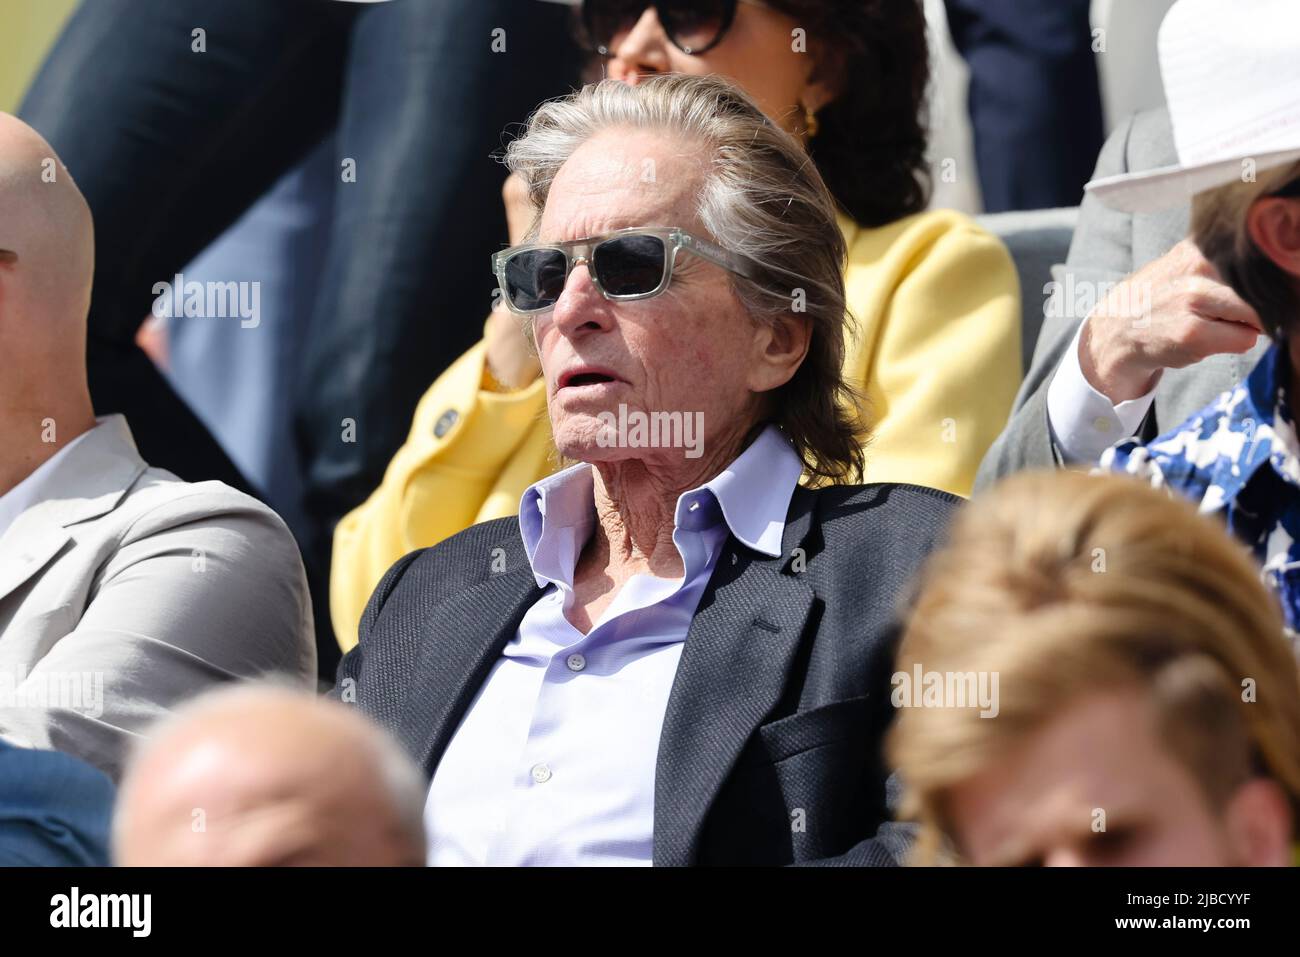 Paris, France. 05th June, 2022. Tennis: Grand Slam/ATP Tour - French Open, men's singles, final, Nadal (Spain) - Ruud (Norway): US actor Michael Douglas sits in the stands. Credit: Frank Molter/dpa Credit: dpa picture alliance/Alamy Live News/dpa/Alamy Live News Stock Photo